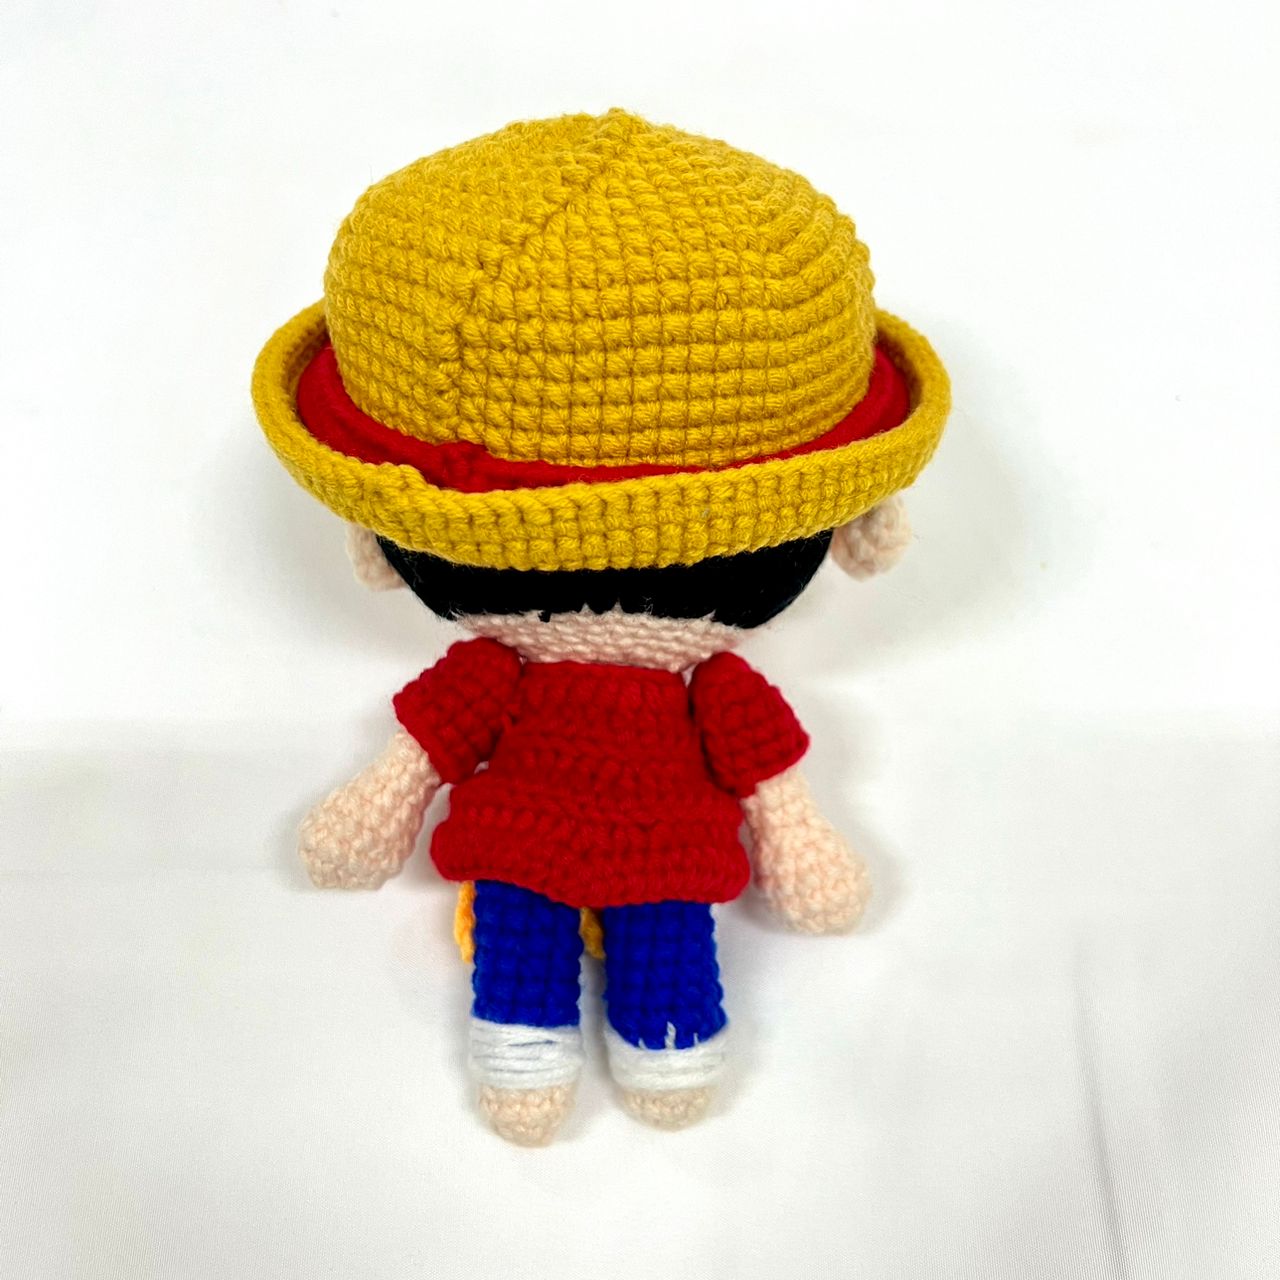 Fan Made One Piece Plush "Luffy" Keychain-Fan Made-Ace Cards & Collectibles